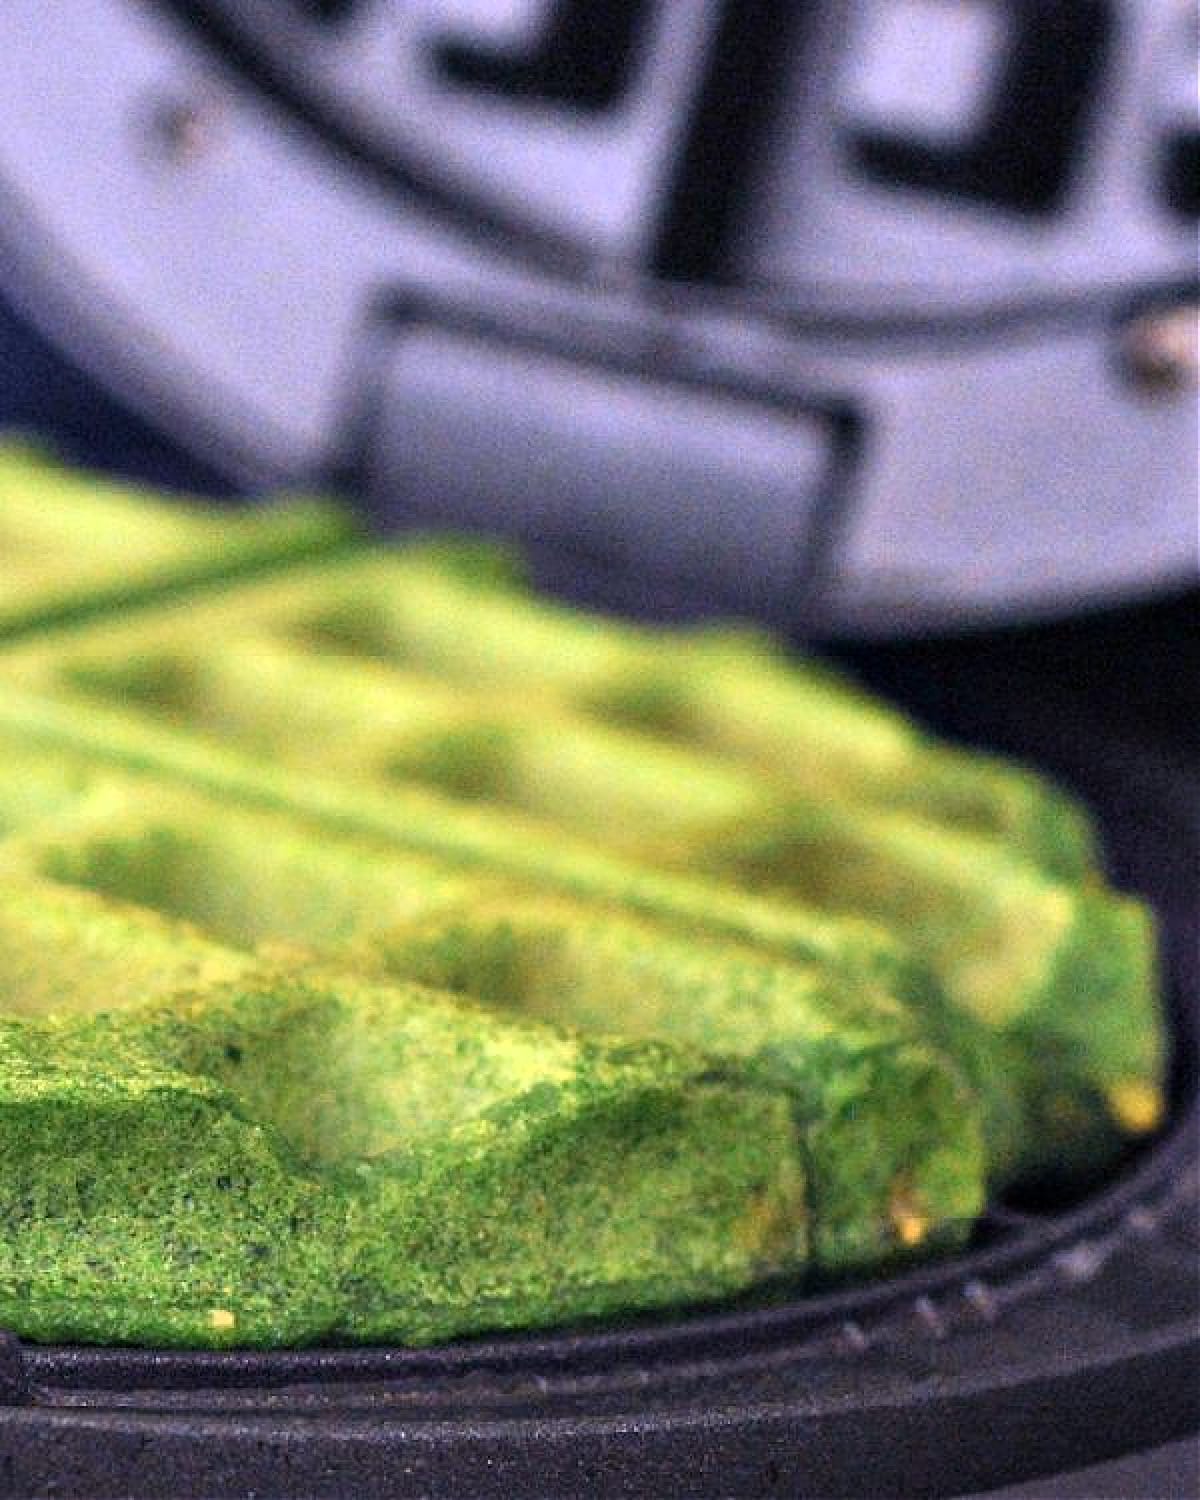 Bright green spinach waffle in an open waffle maker.